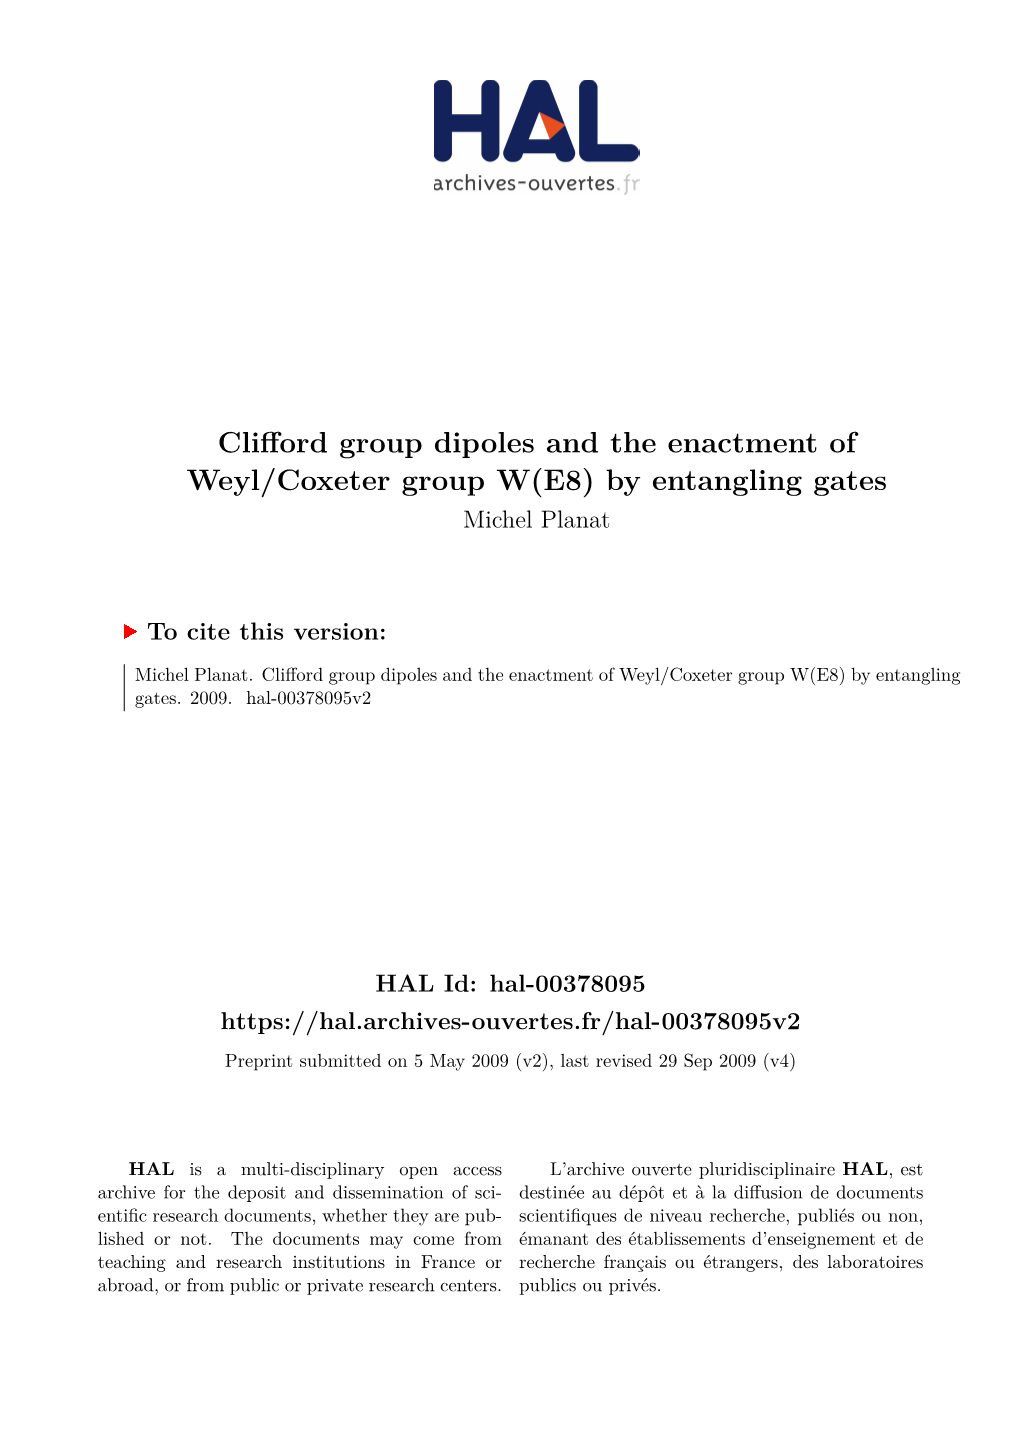 Clifford Group Dipoles and the Enactment of Weyl/Coxeter Group W(E8) by Entangling Gates Michel Planat